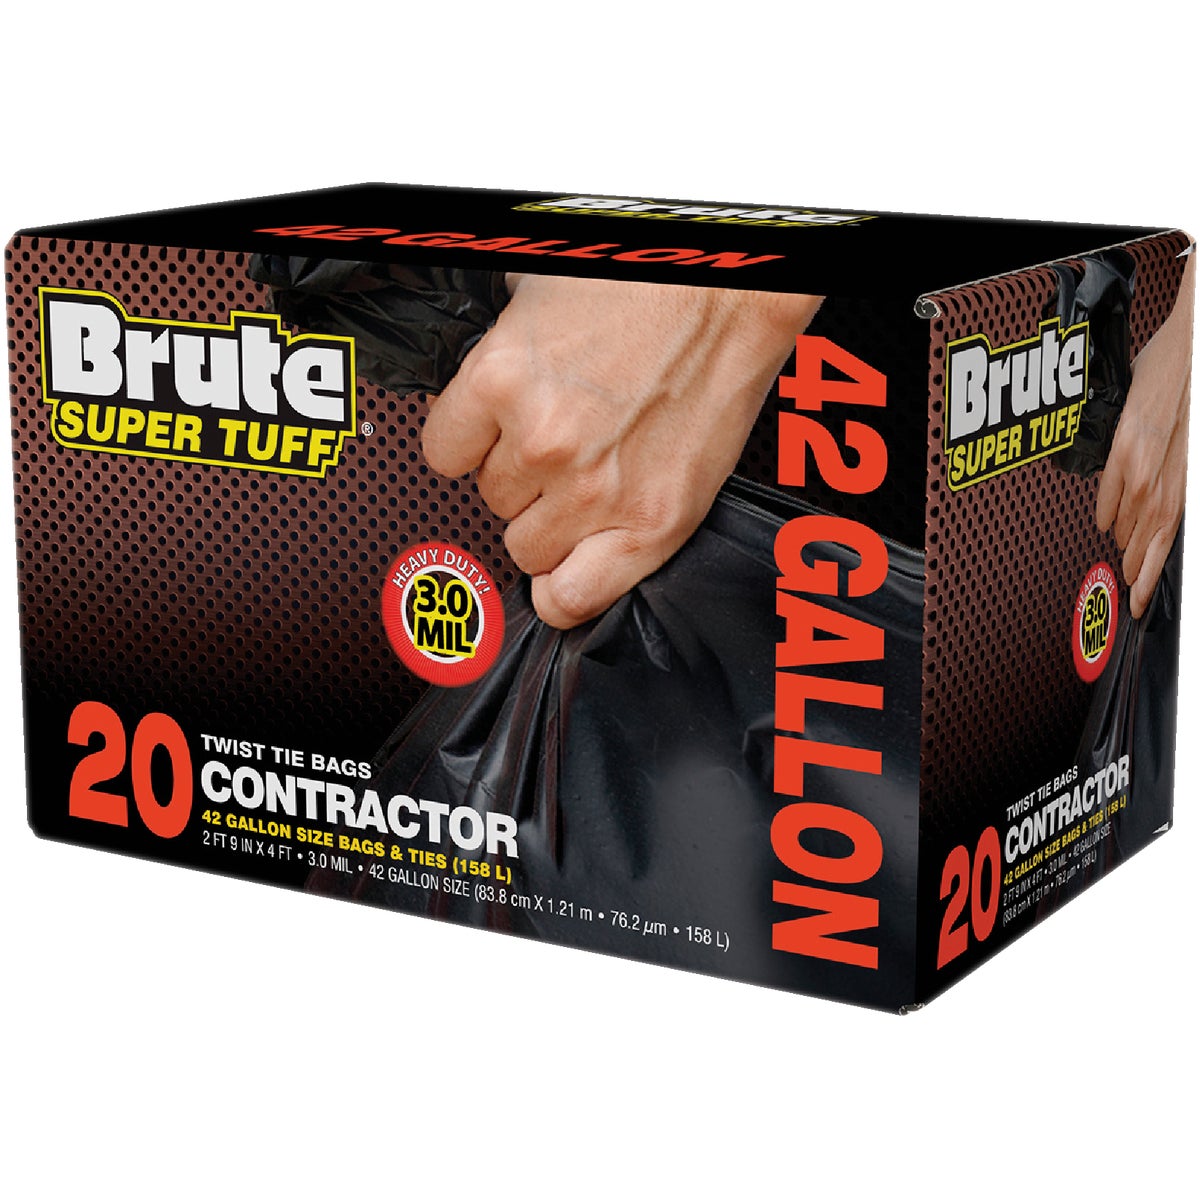 Item 628226, Contractor trash bag is suitable for professional and residential cleanup 